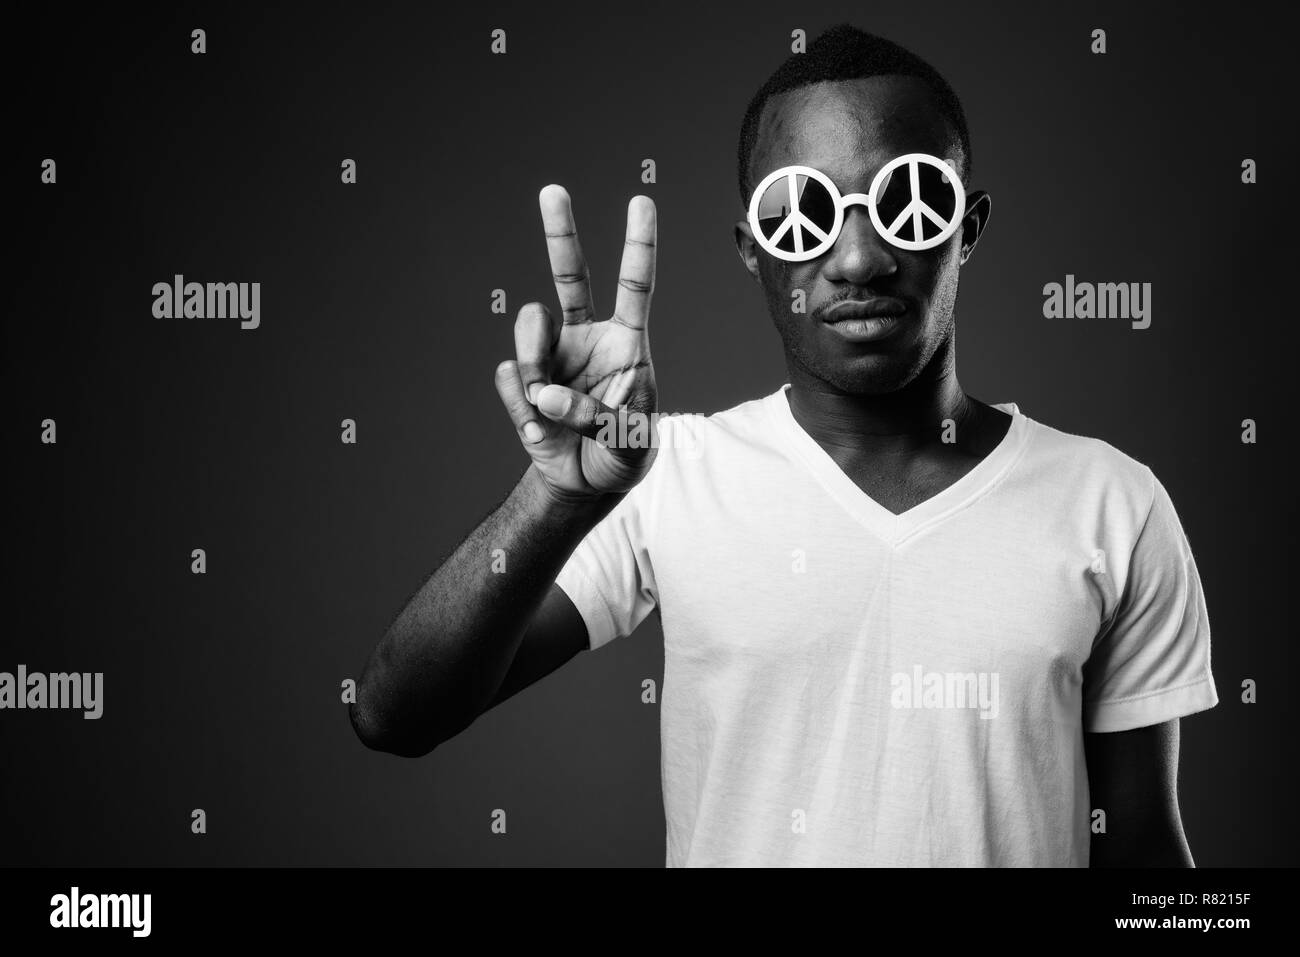 Young African man wearing peace sunglasses and making peaceful gesture Stock Photo